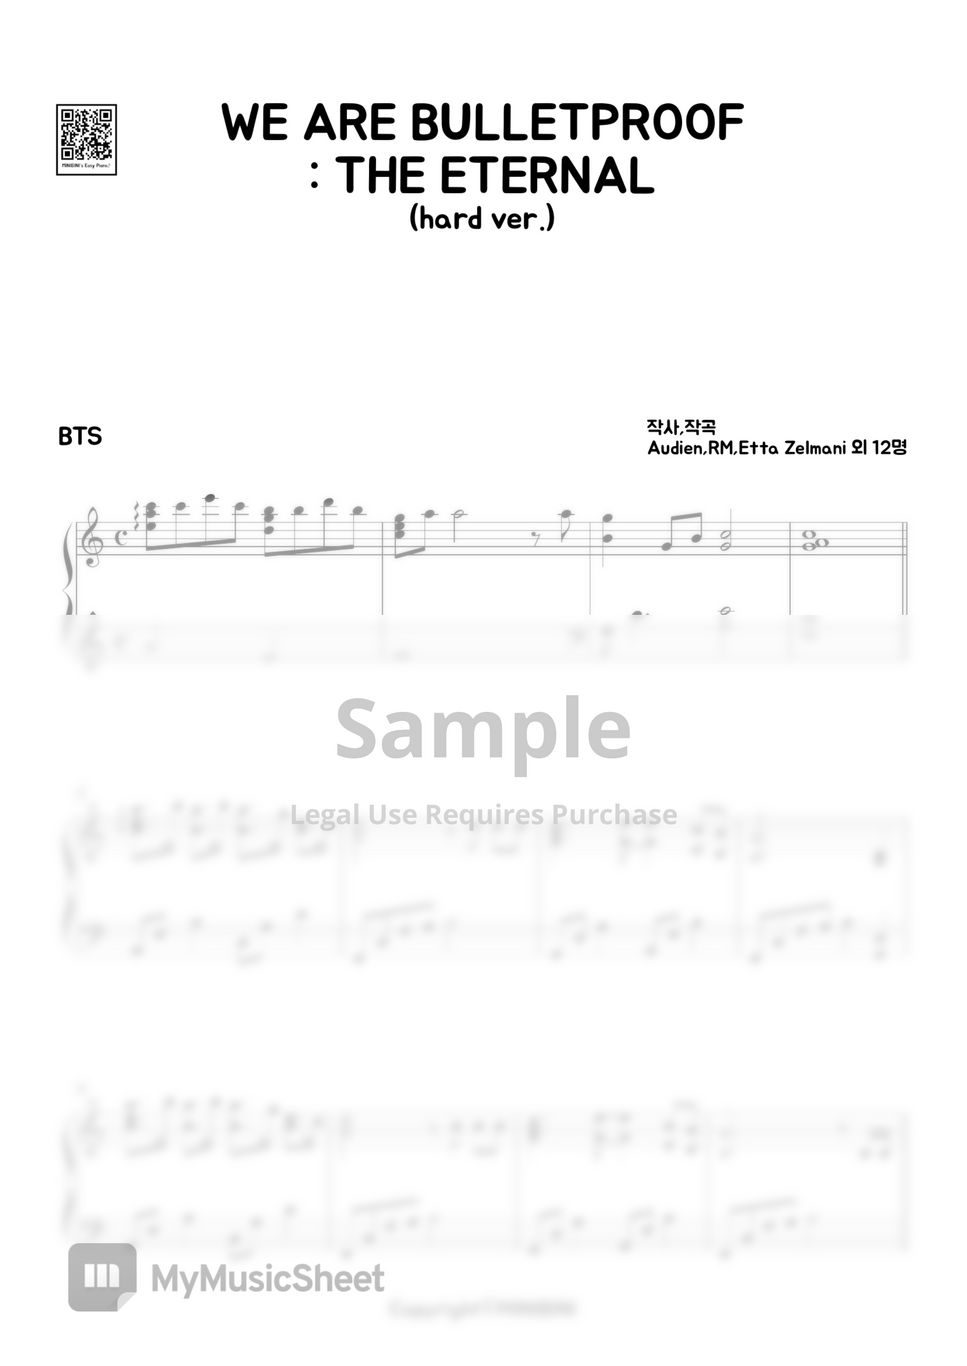 BTS (방탄소년단) - We are Bulletproof : the Eternal [MAP OF THE SOUL : 7] (Hard Version) by MINIBINI